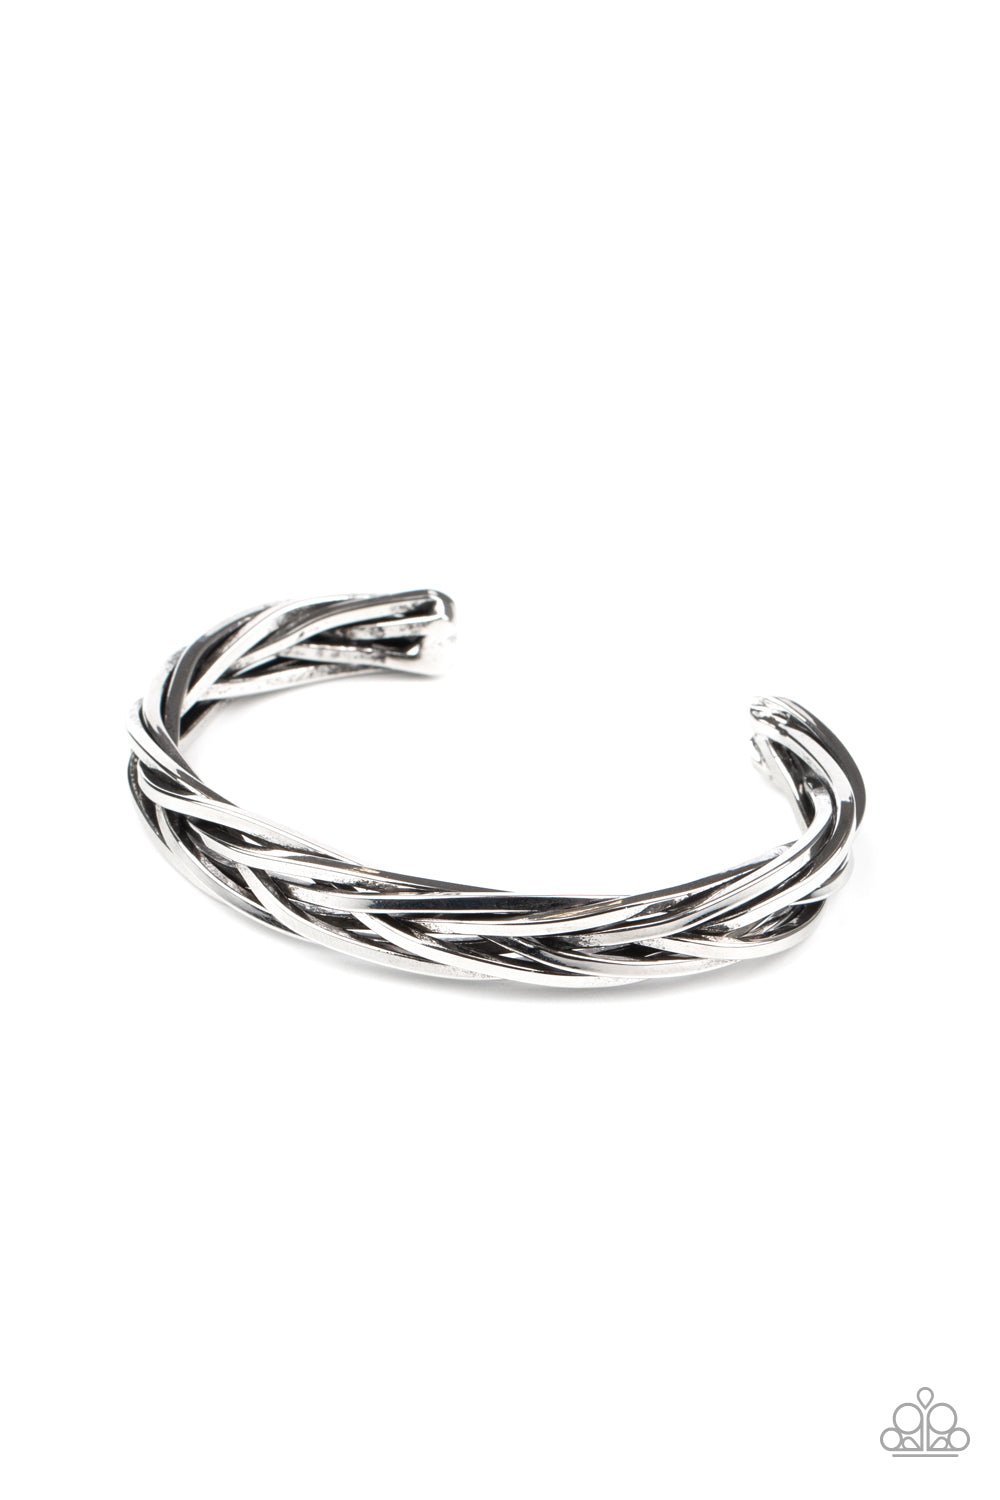 &lt;P&gt; Brushed in an antiqued finish, rustic silver bars weave and braid into an edgy cuff around the wrist.&lt;/P&gt;  

&lt;P&gt; &lt;I&gt;Sold as one individual bracelet. &lt;/I&gt;&lt;/P&gt;

&lt;br&gt;This piece was featured as part of our Fall Training during Unwritten.&lt;/P&gt;

&lt;img src=\&quot;https://d9b54x484lq62.cloudfront.net/paparazzi/shopping/images/517_tag150x115_1.png\&quot; alt=\&quot;New Kit\&quot; align=\&quot;middle\&quot; height=\&quot;50\&quot; width=\&quot;50\&quot;/&gt;